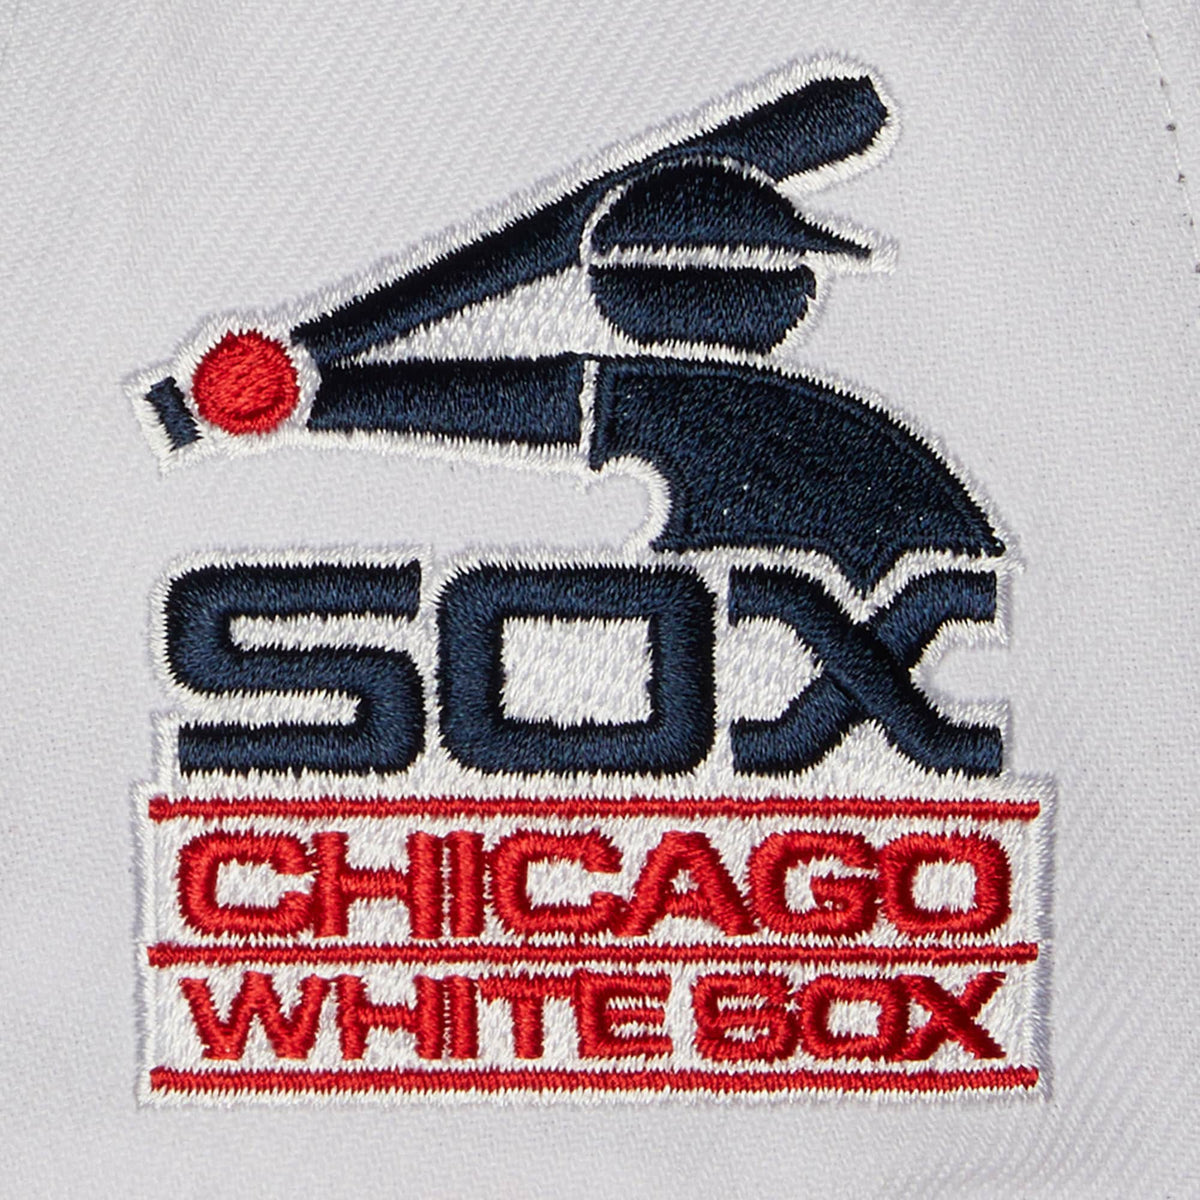 Evergreen Pro Snapback Coop Chicago White Sox - Shop Mitchell & Ness  Snapbacks and Headwear Mitchell & Ness Nostalgia Co.